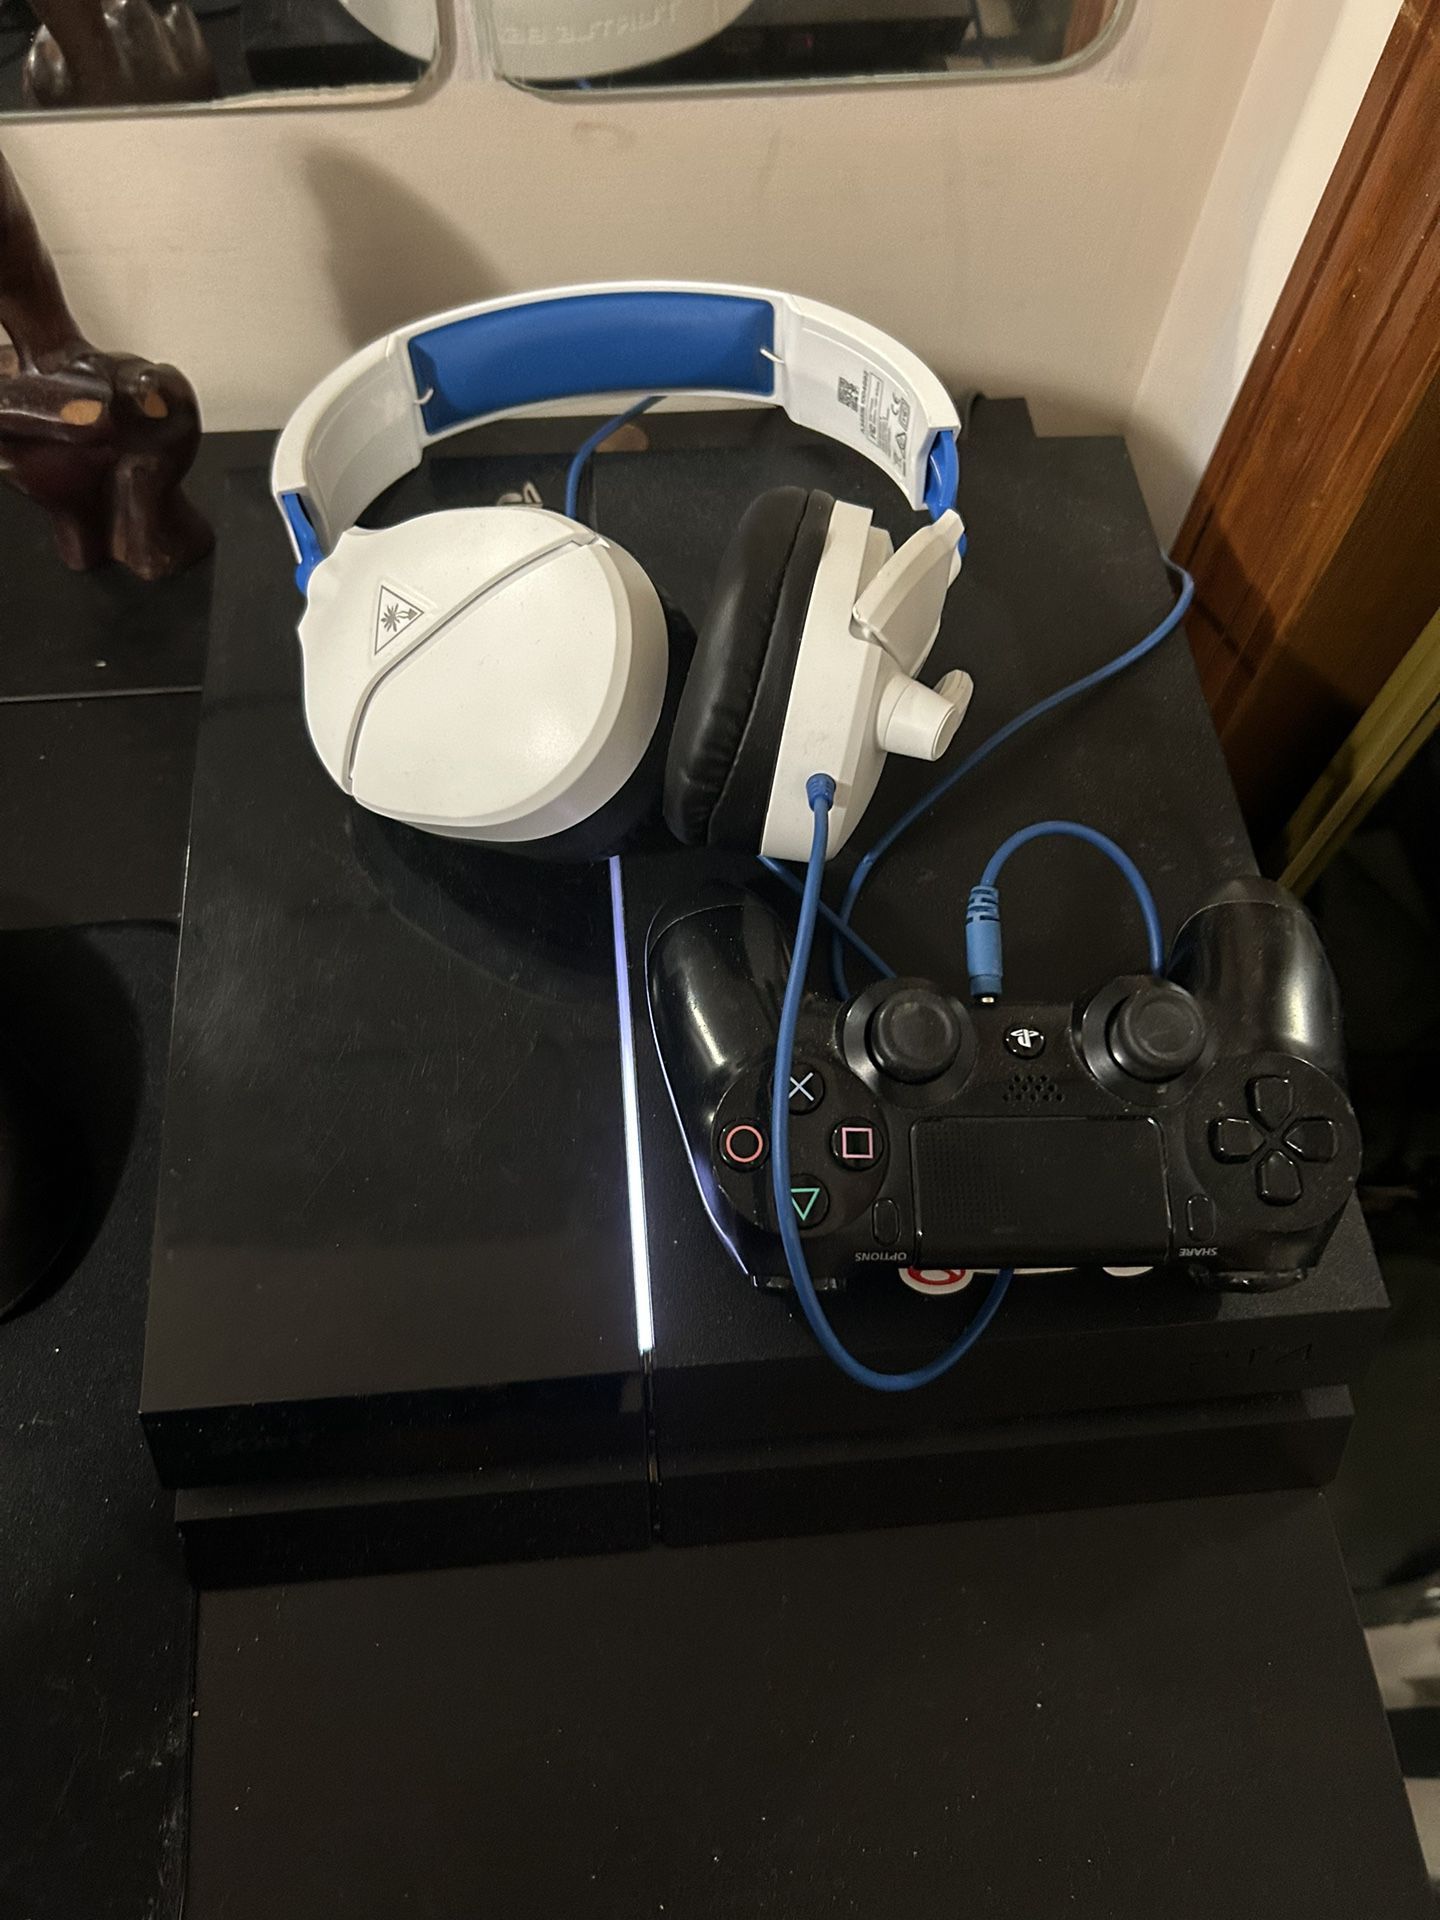 PS4 with Turtle Beach Headset, Remote & Game